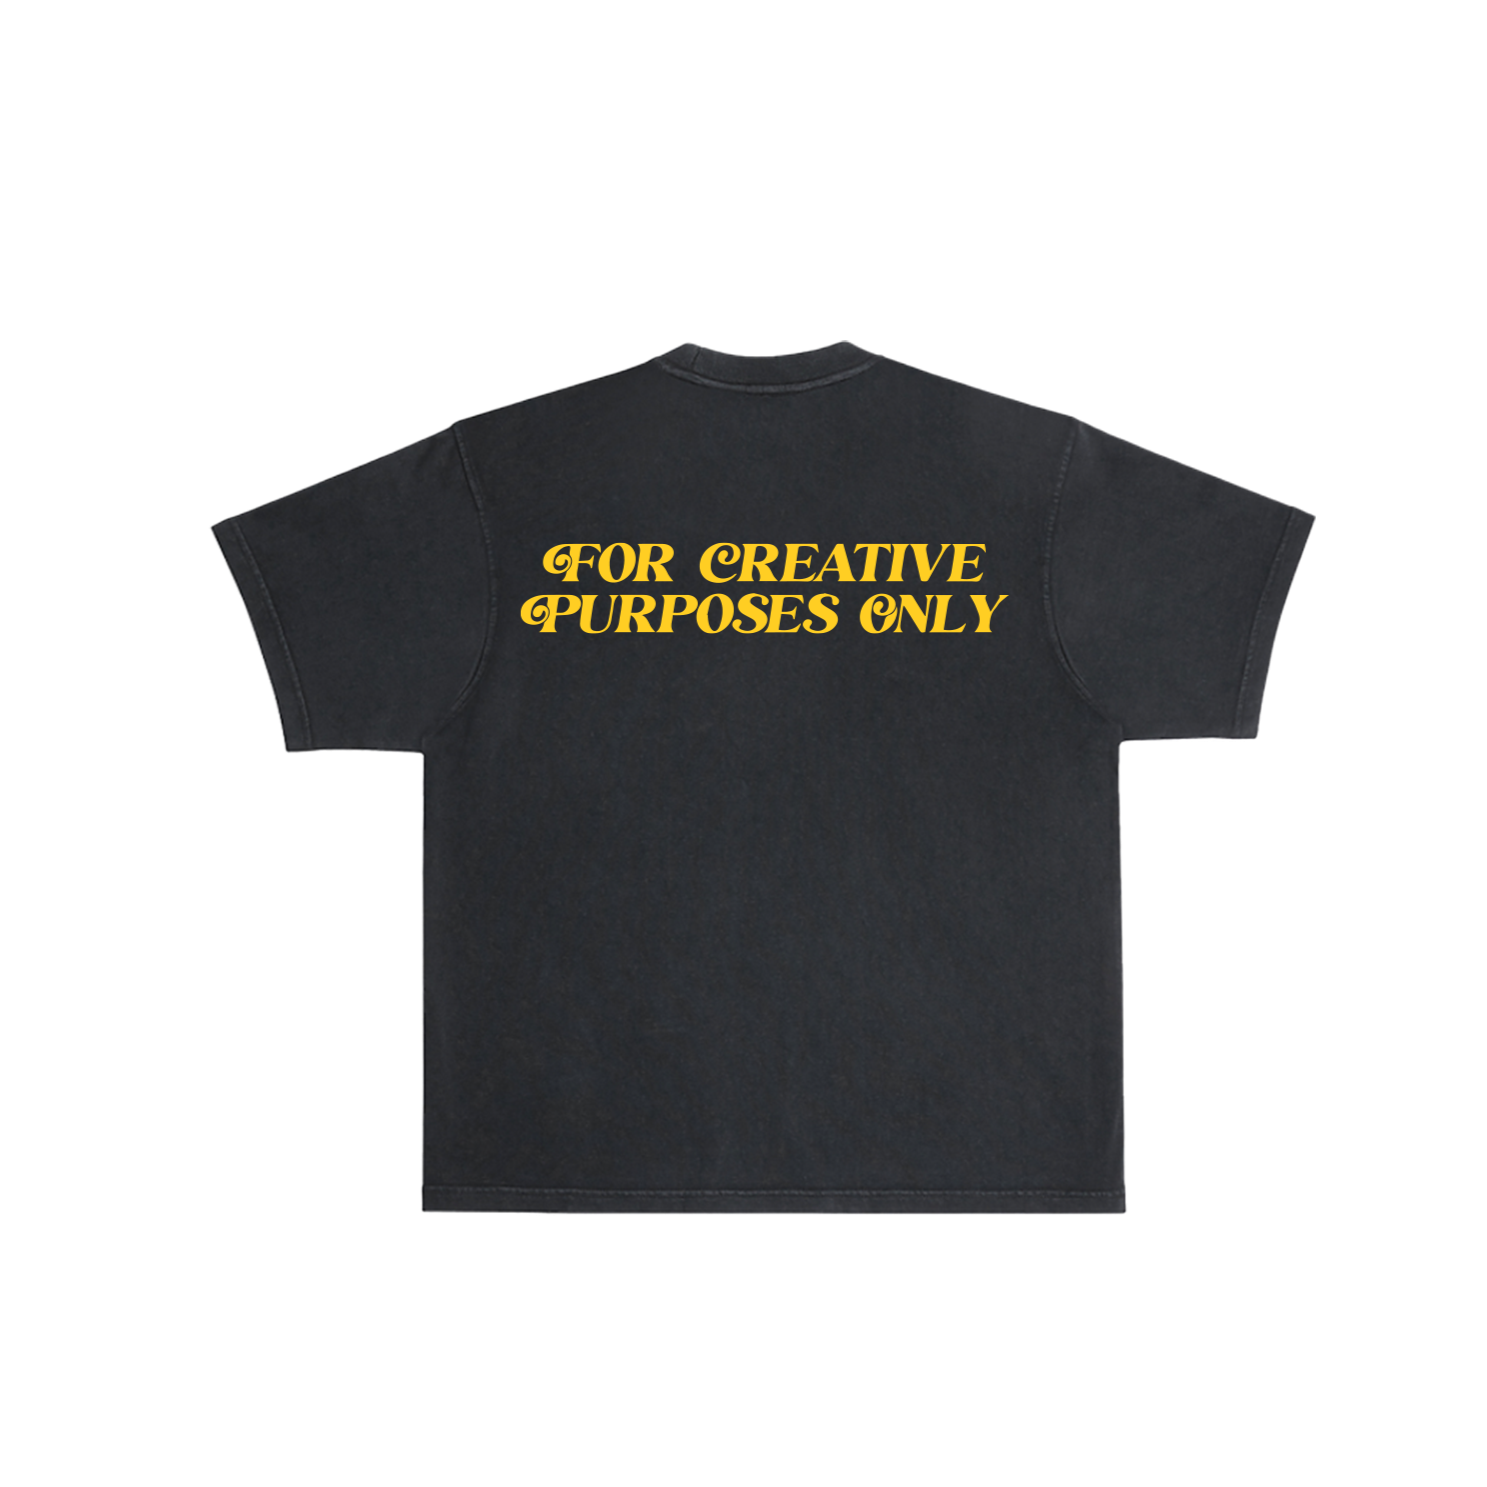 For Creative Purposes Only - T-Shirt (Black + Yellow)